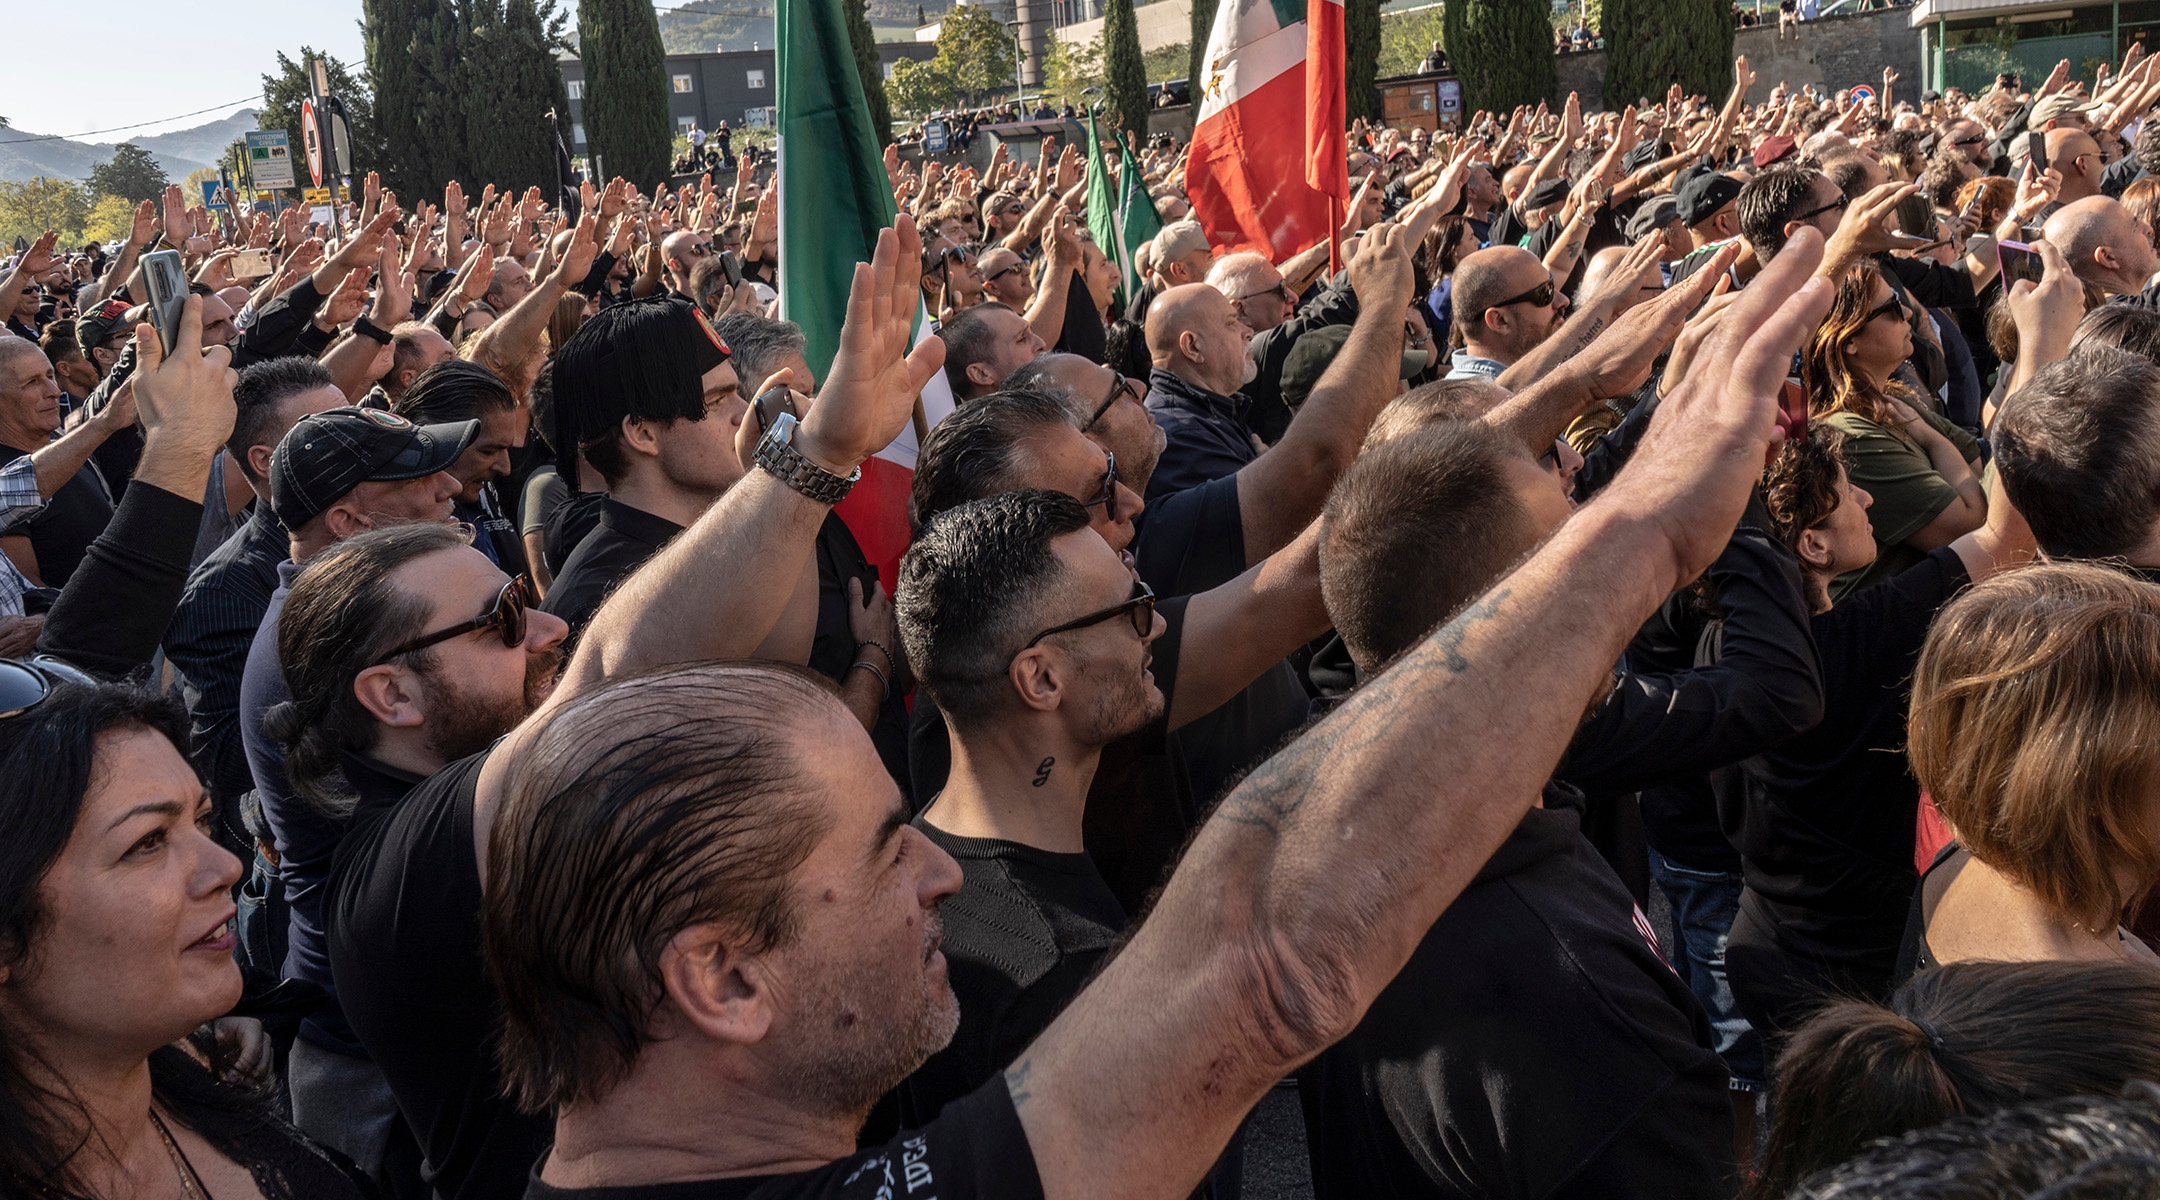 Fascist sympathizers do the Saluto Romano outside the cemetery of San Cassiano, where Benito Mussolini is buried, as Italians mark one hundred years after Mussolini’s March on Rome in Predappio, Italy, Oct. 30, 2022. (Francesca Volpi/Getty Images)